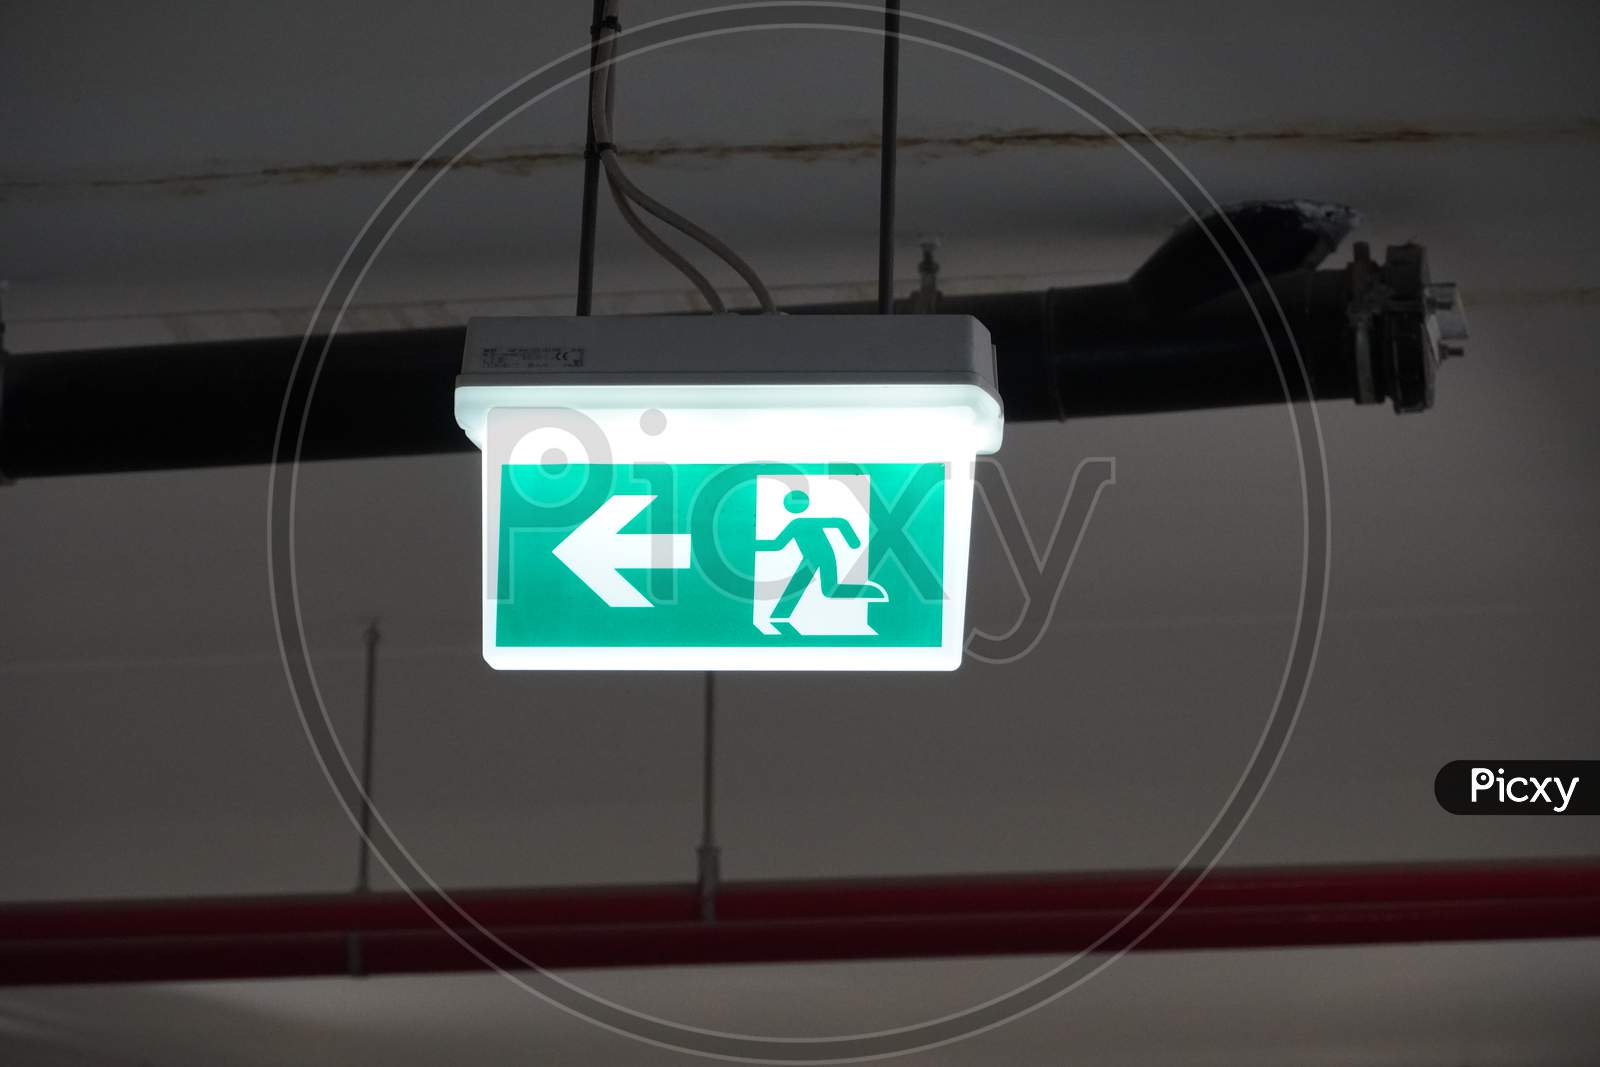 Glowing Emergency Exit Sign With Left Arrow At A Building. Safety First Concept. Copy Space Wallpaper. Exit Signs With Light In A Parking Of Building.